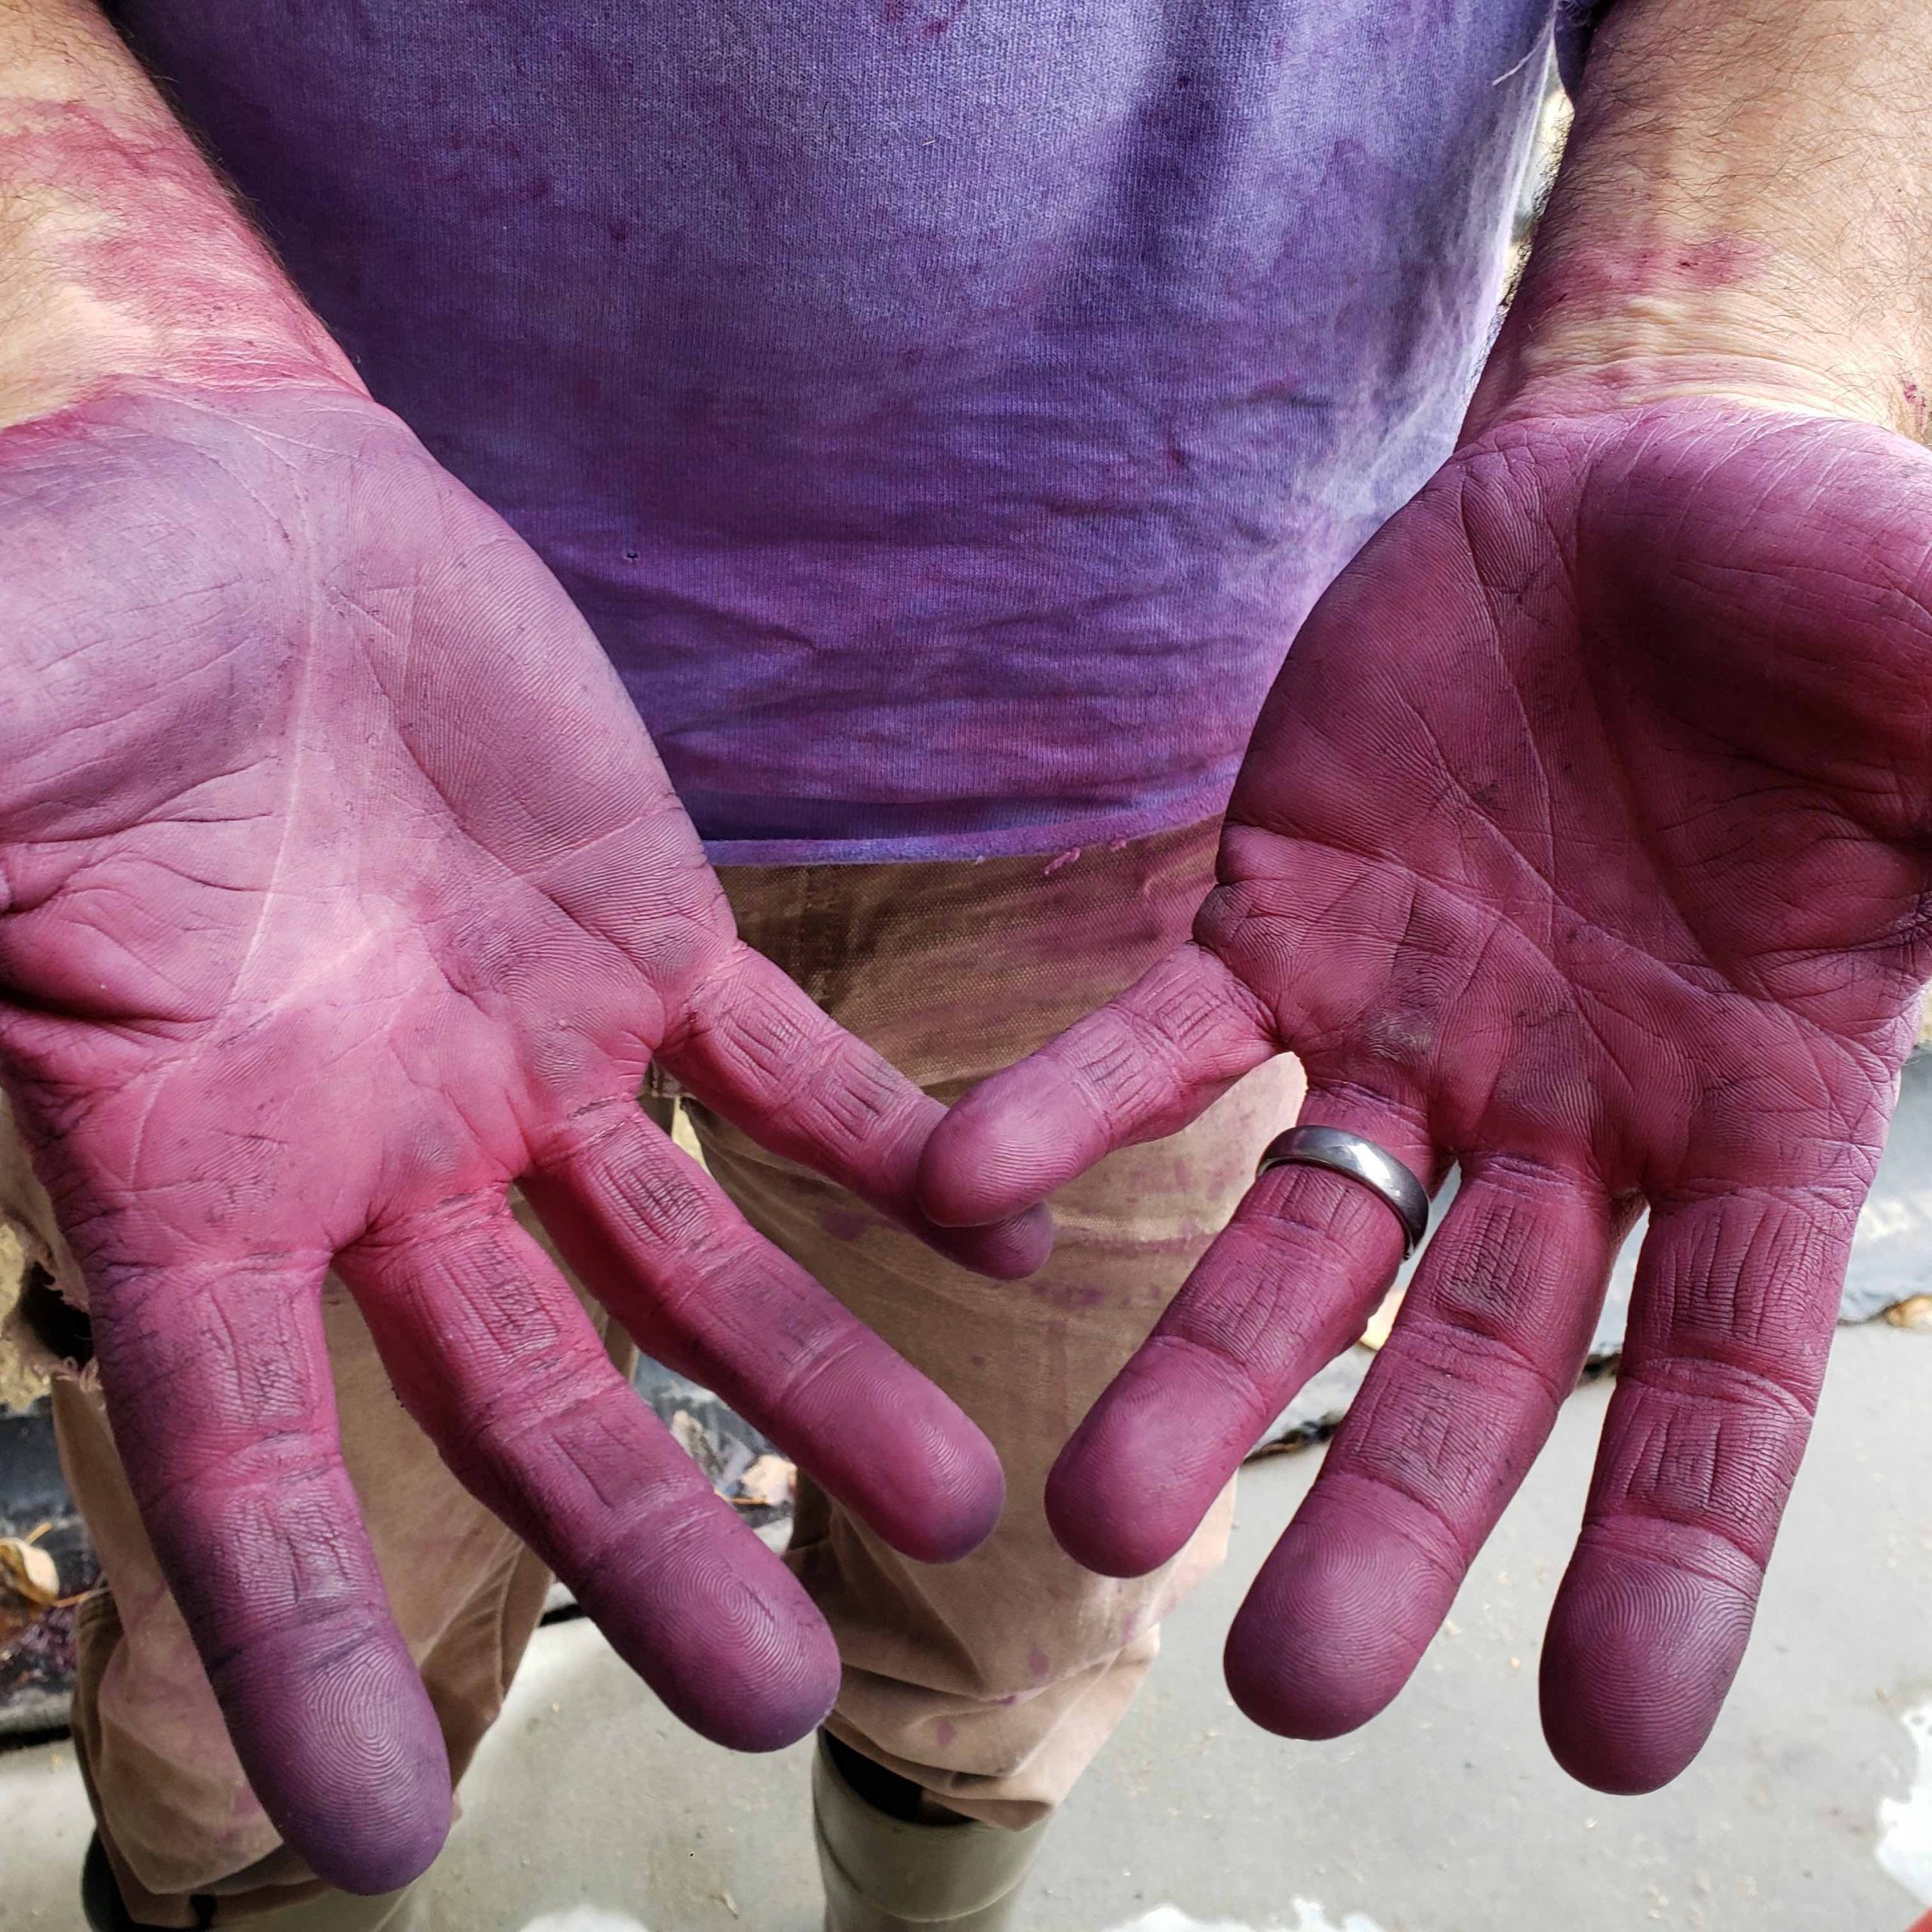 grape-stained-hands-montana-wine